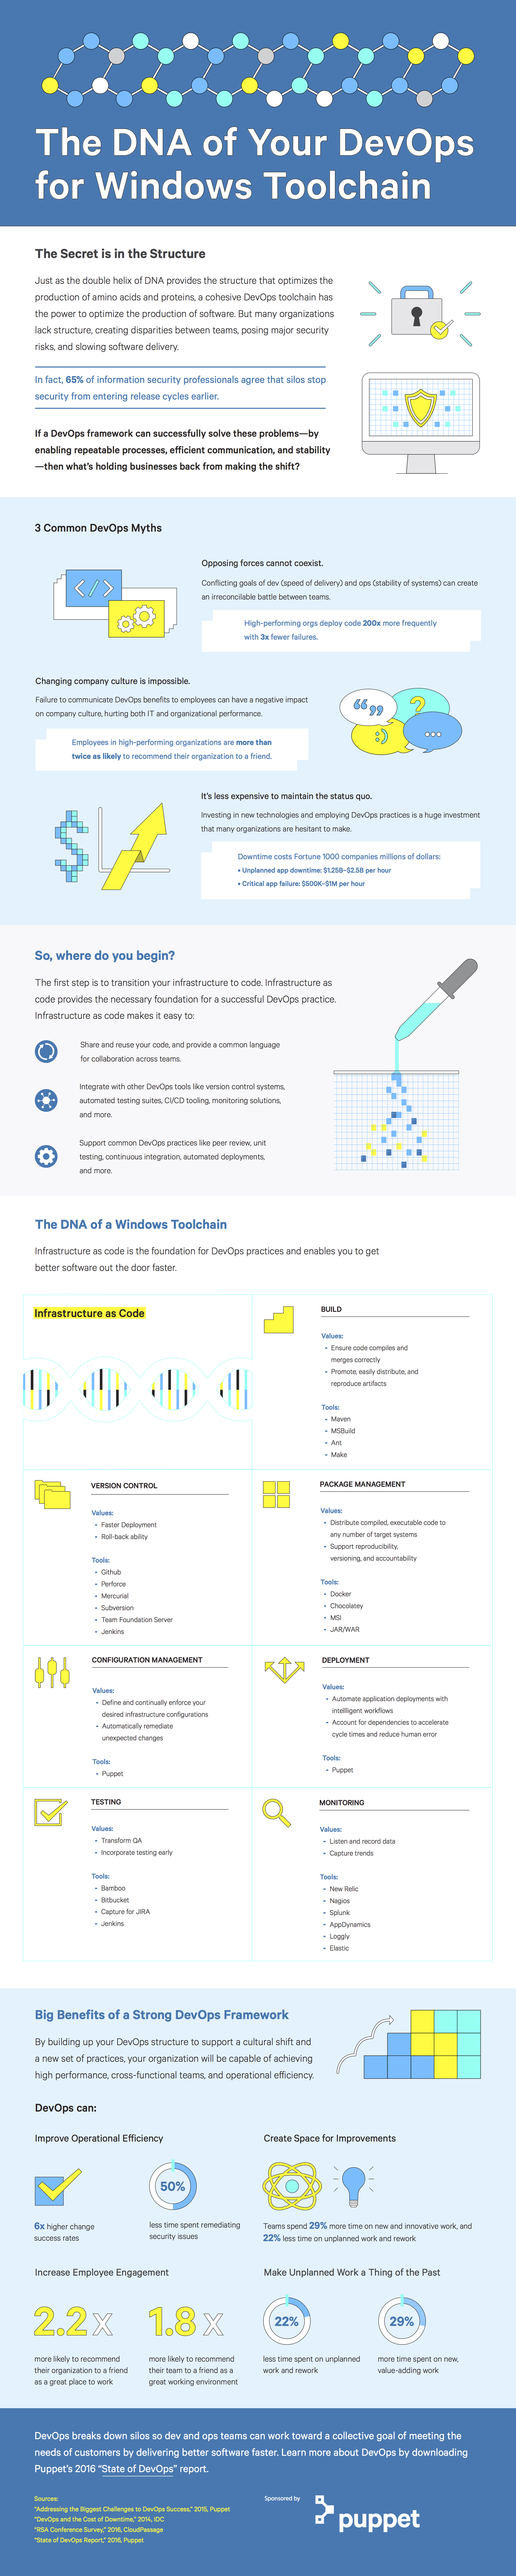 How DevOps Toolchain is the DNA for Software Development: The Windows Story - Infographic